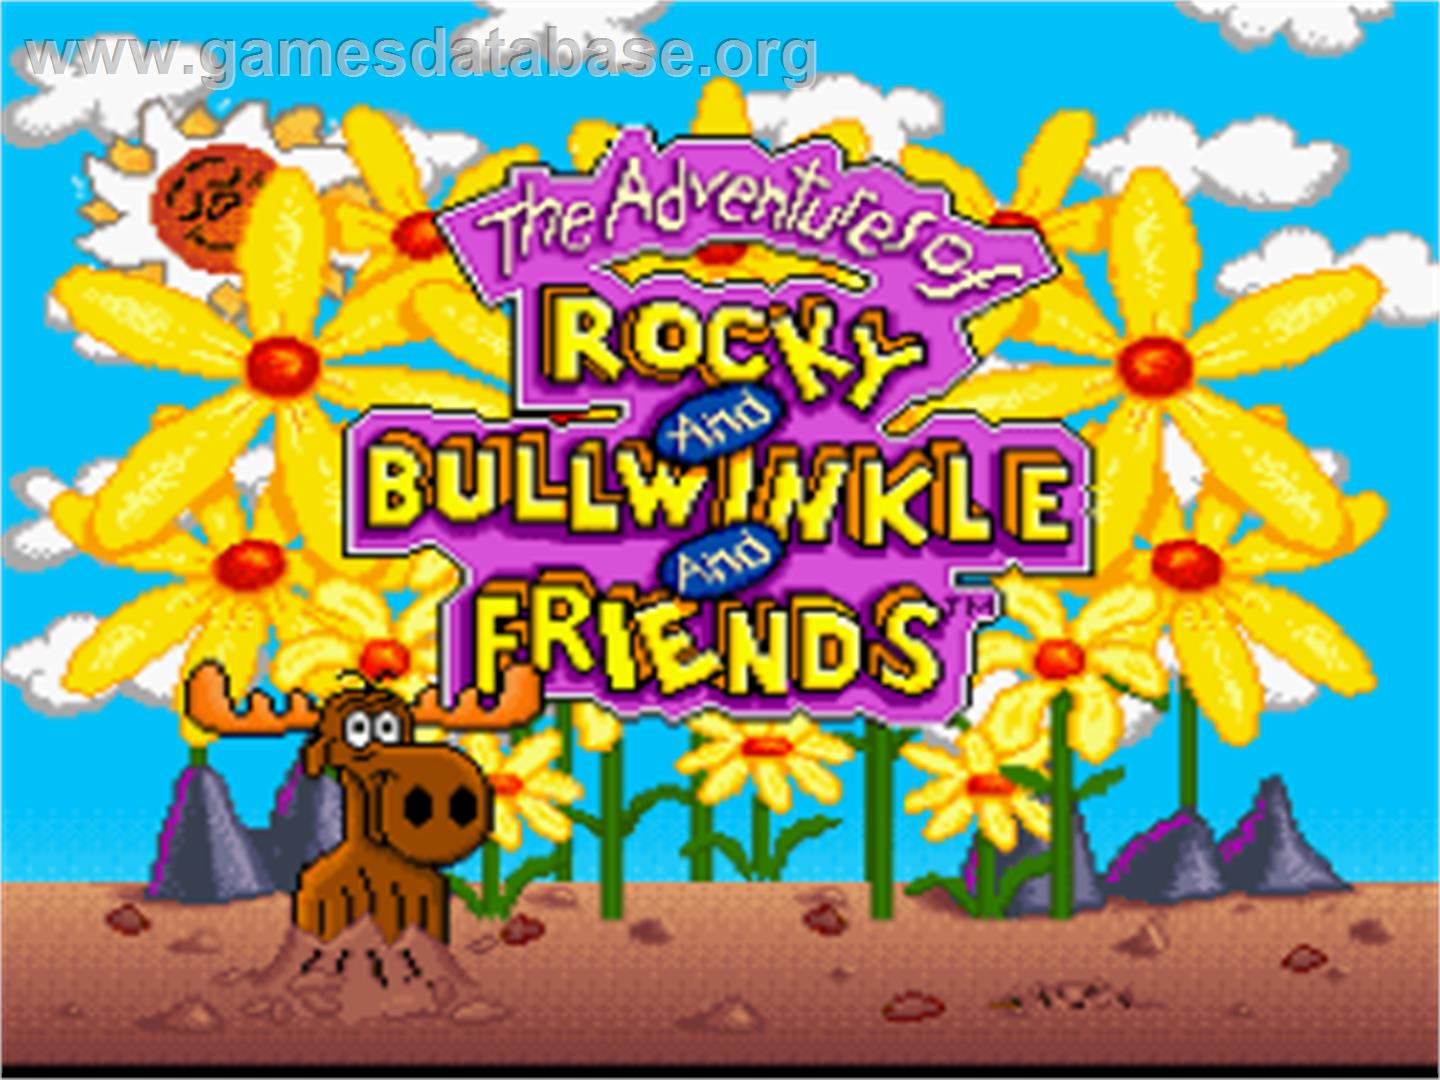 The Adventures of Rocky and Bullwinkle & Friends - Nintendo SNES - Artwork - Title Screen